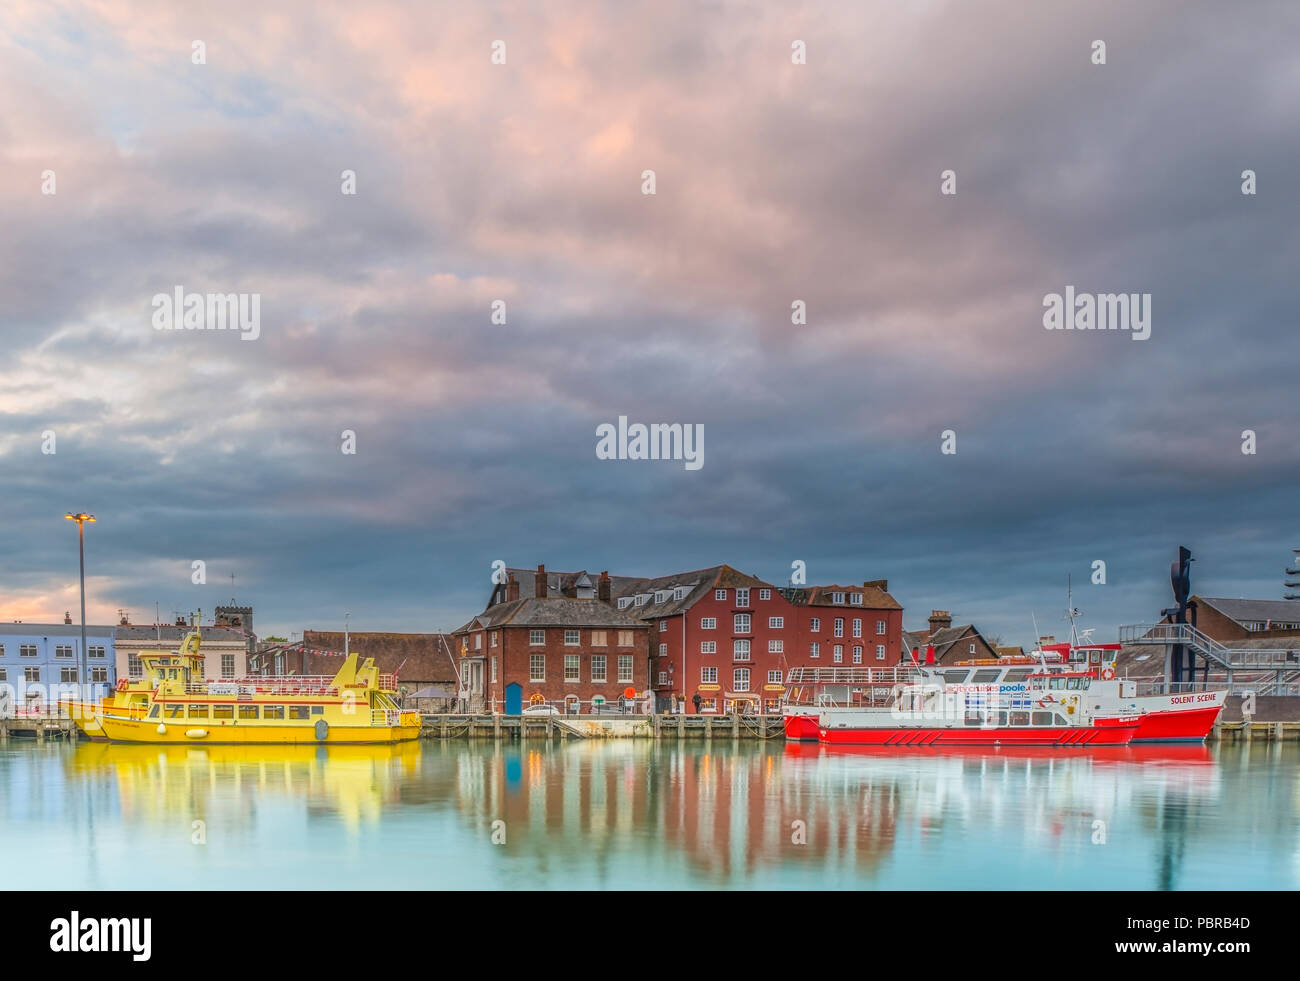 Poole quay in Dorset during a cloudy colourful sunset Stock Photo